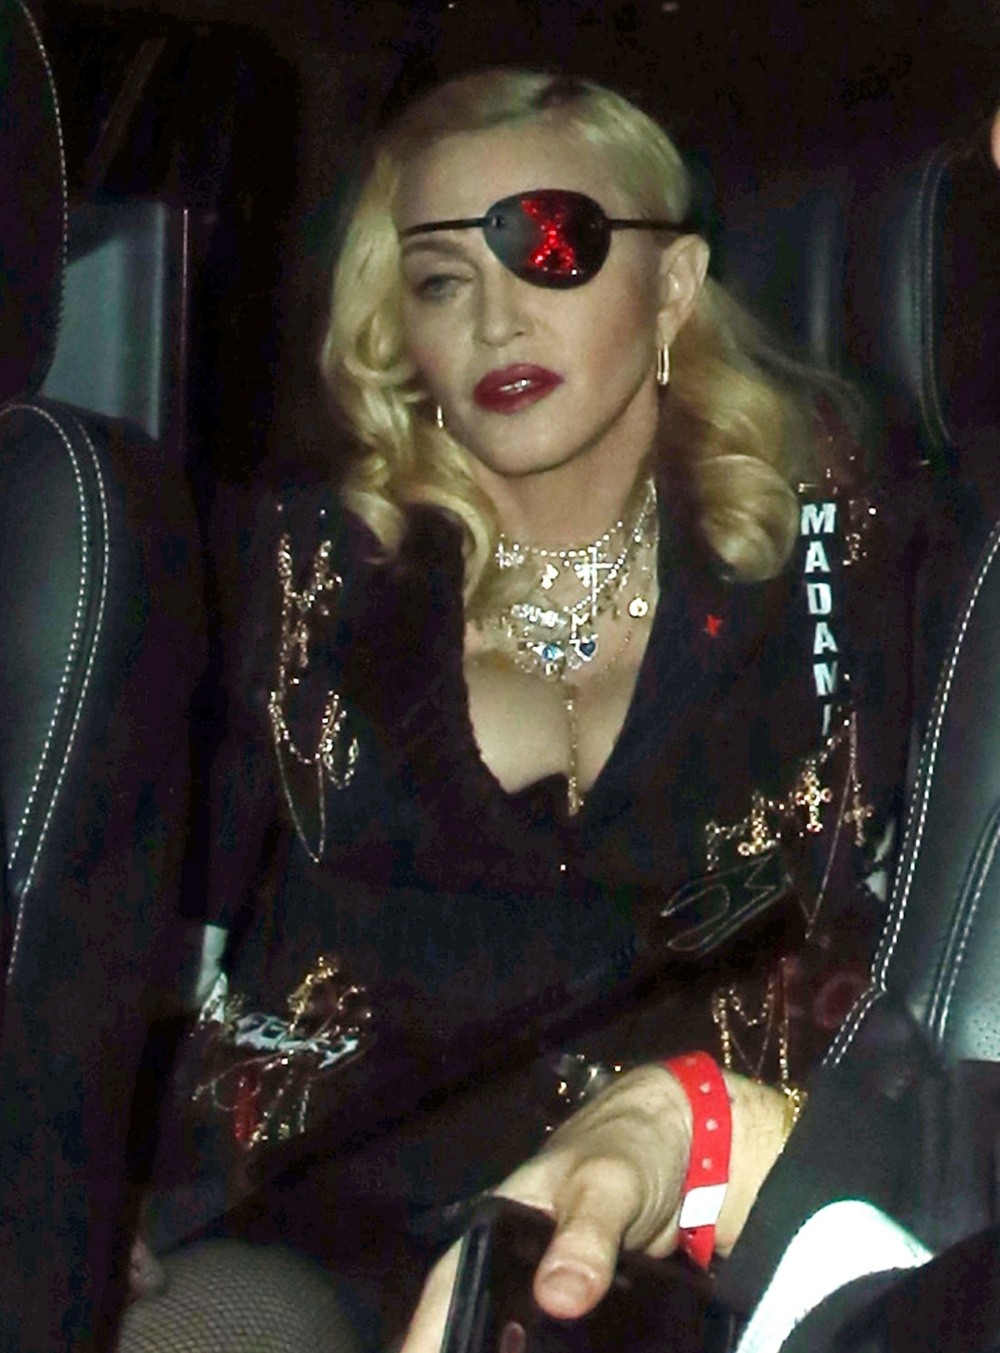 Madonna leaves MTV Studios in London sporting an eye patch